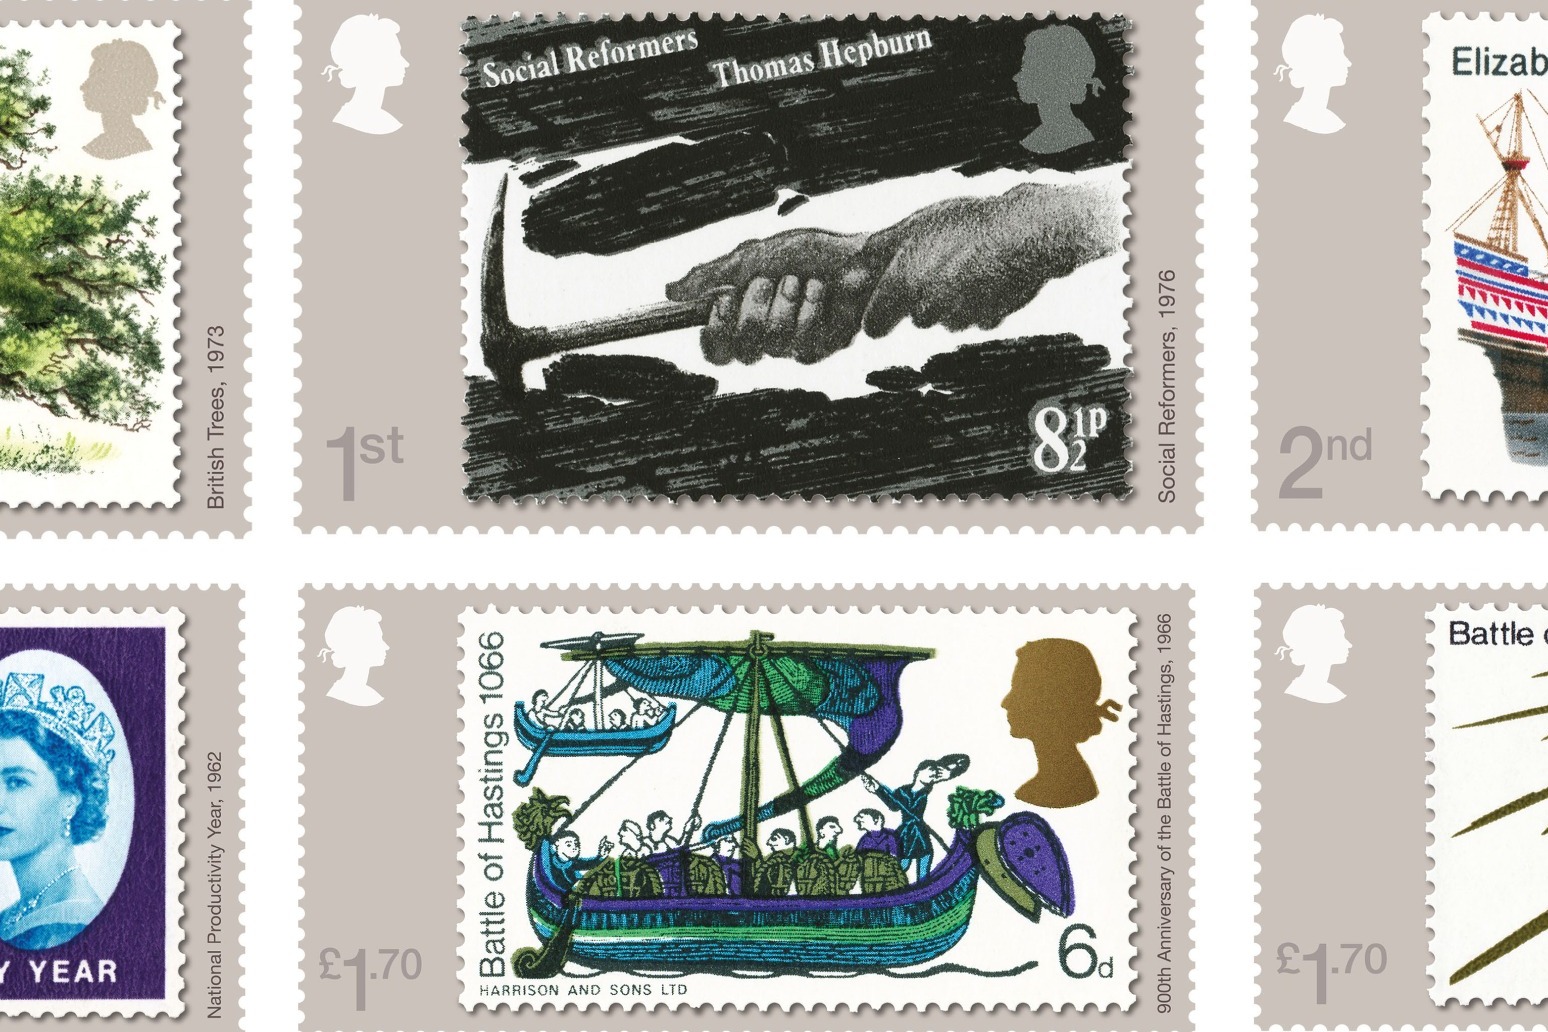 New stamps pay tribute to Royal Mail designer David Gentleman 